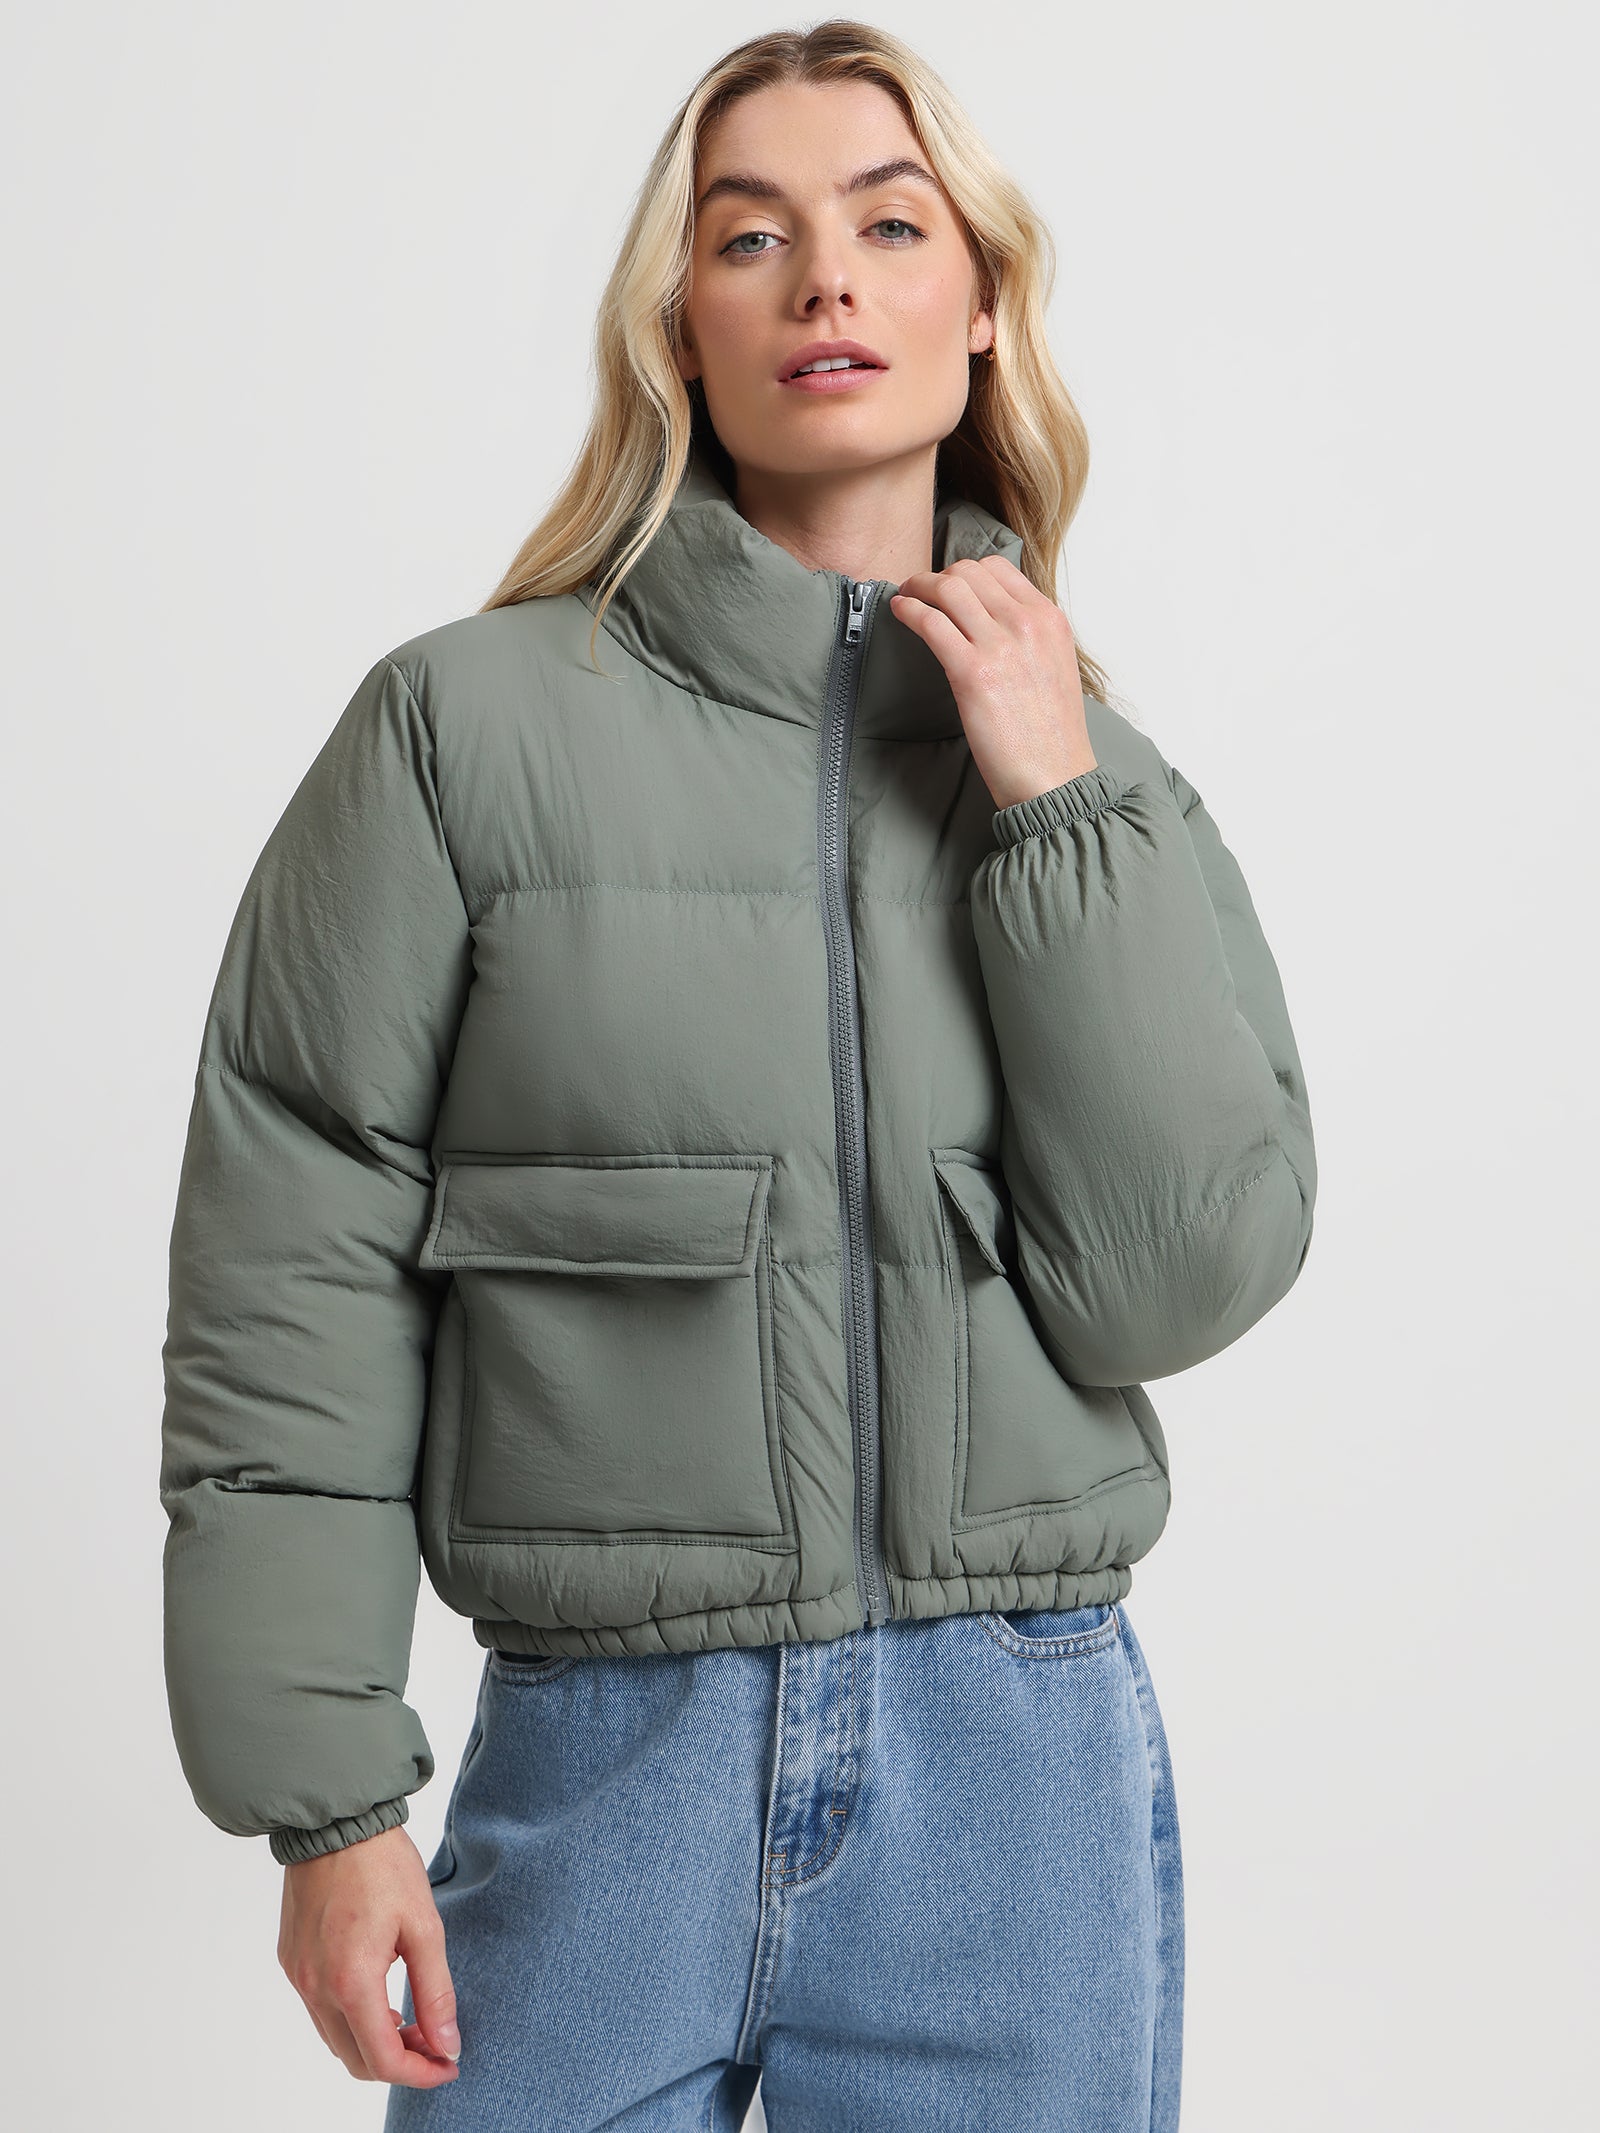 Isola Puffer Jacket in Pewter - Glue Store